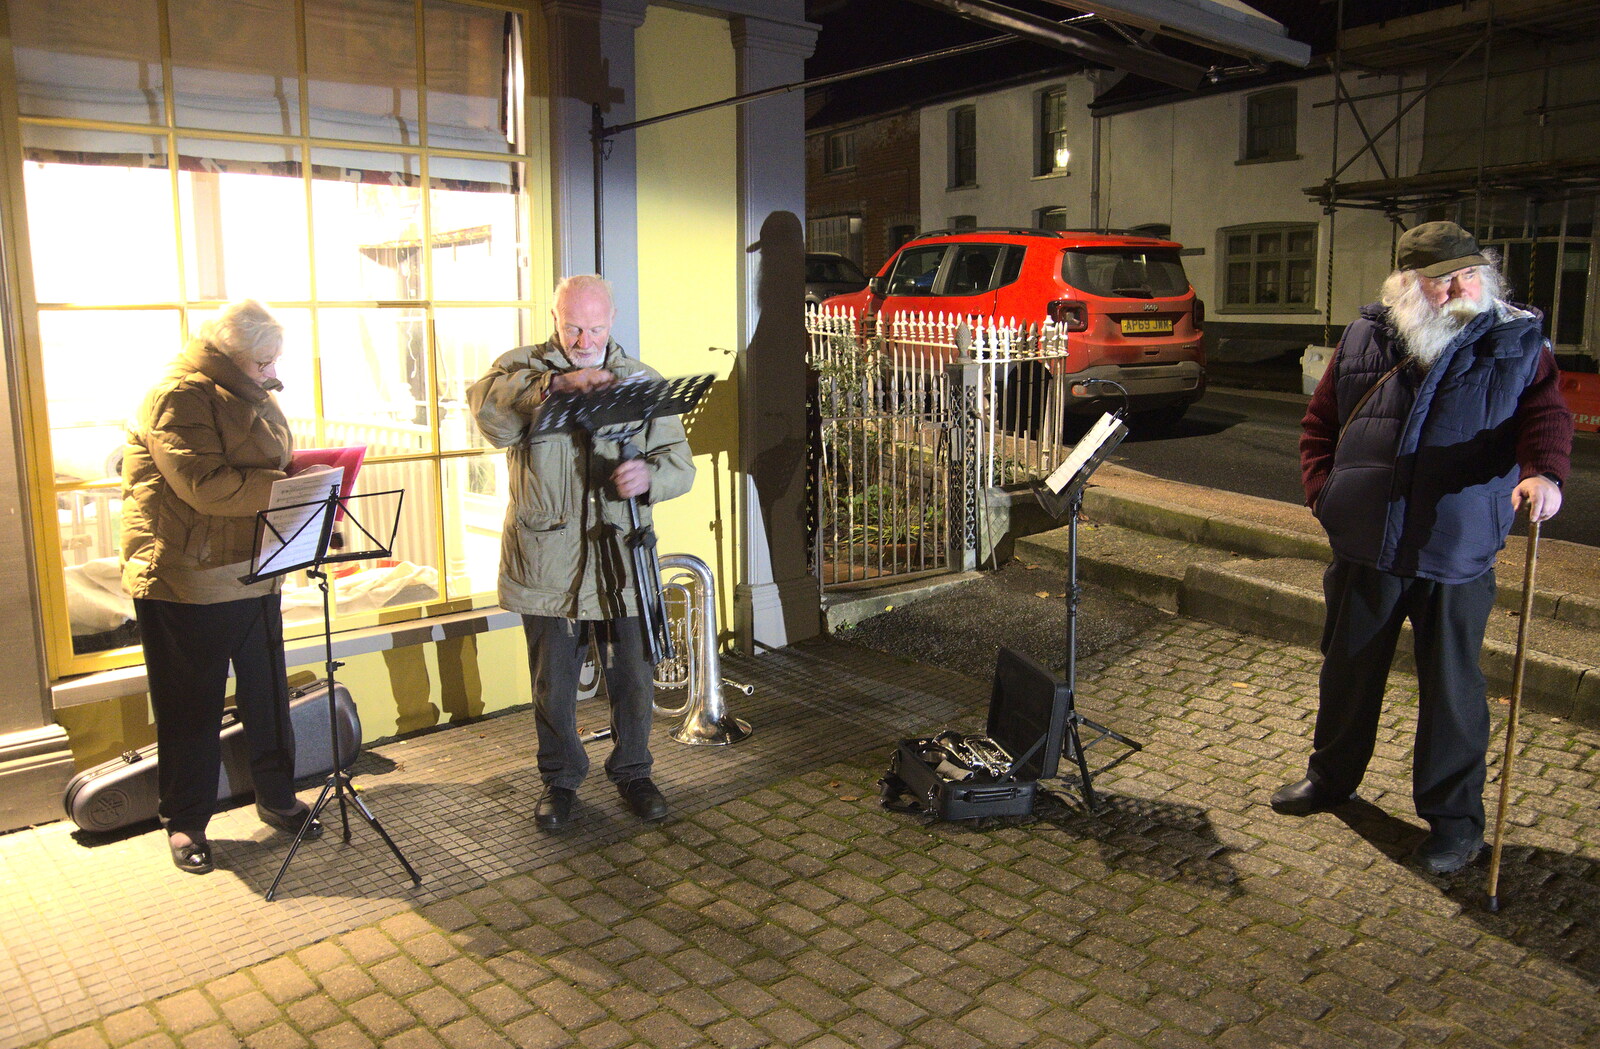 The GSB quintet sets up in Botesdale from Eye Lights and the GSB at Botesdale, Suffolk - 2nd December 2022